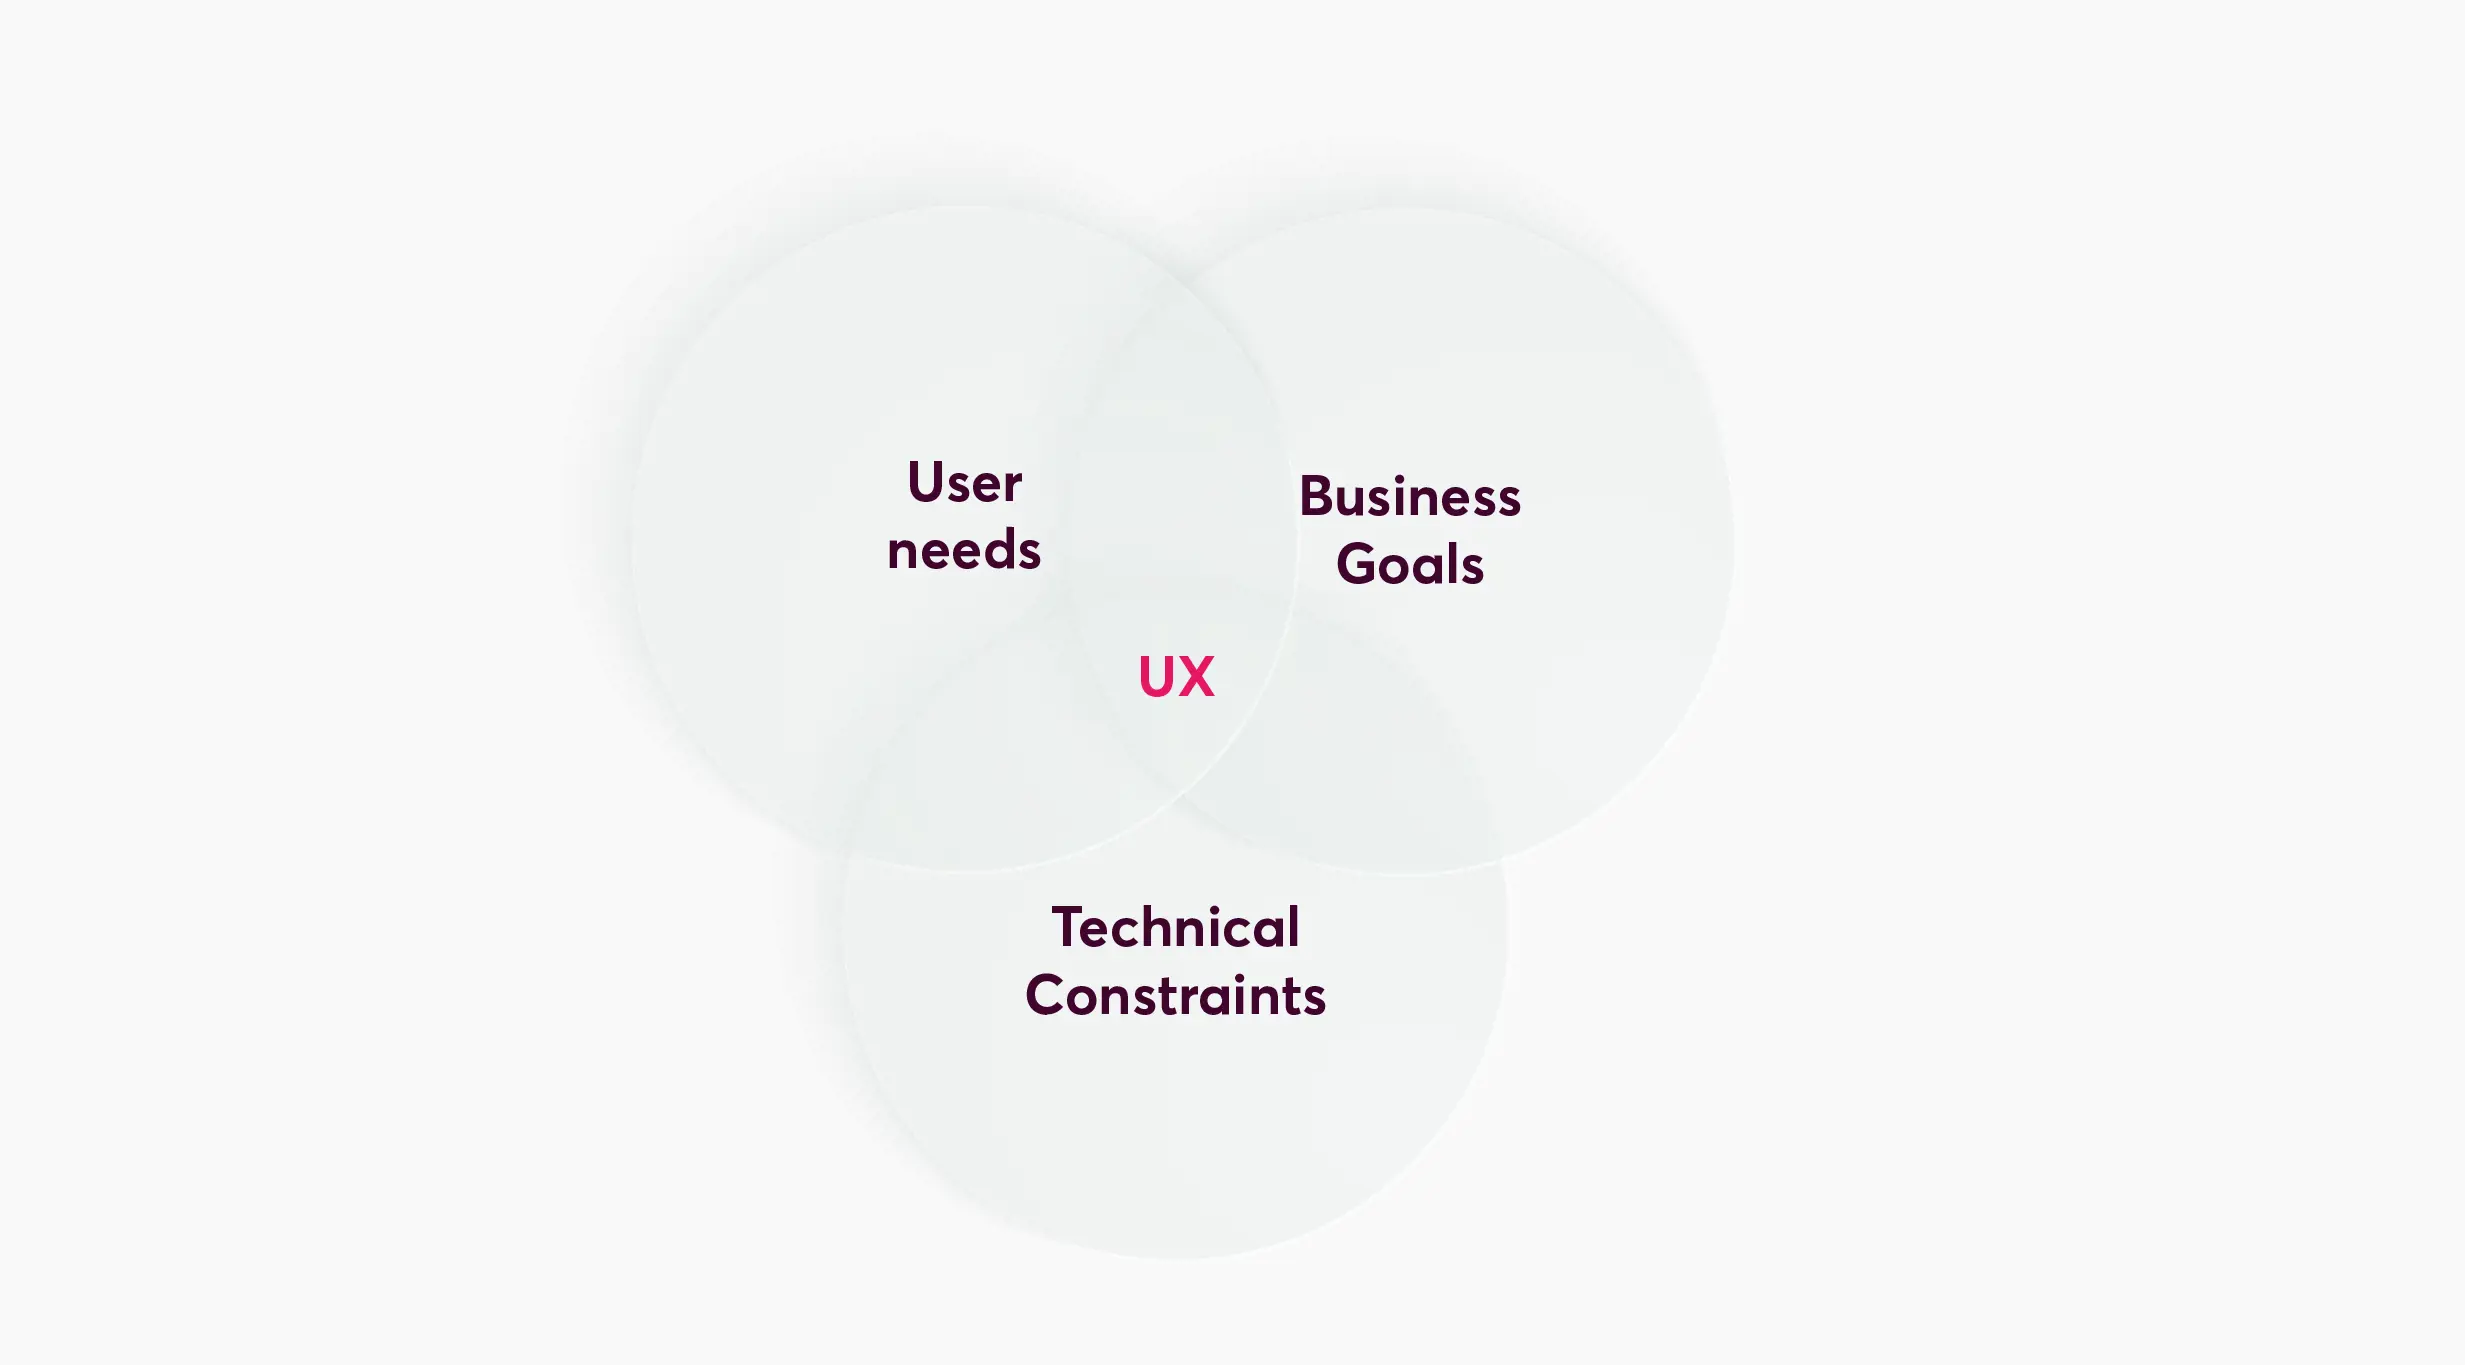 Venn diagram showing the intersection of User Needs, Business Goals, and Technical Constraints